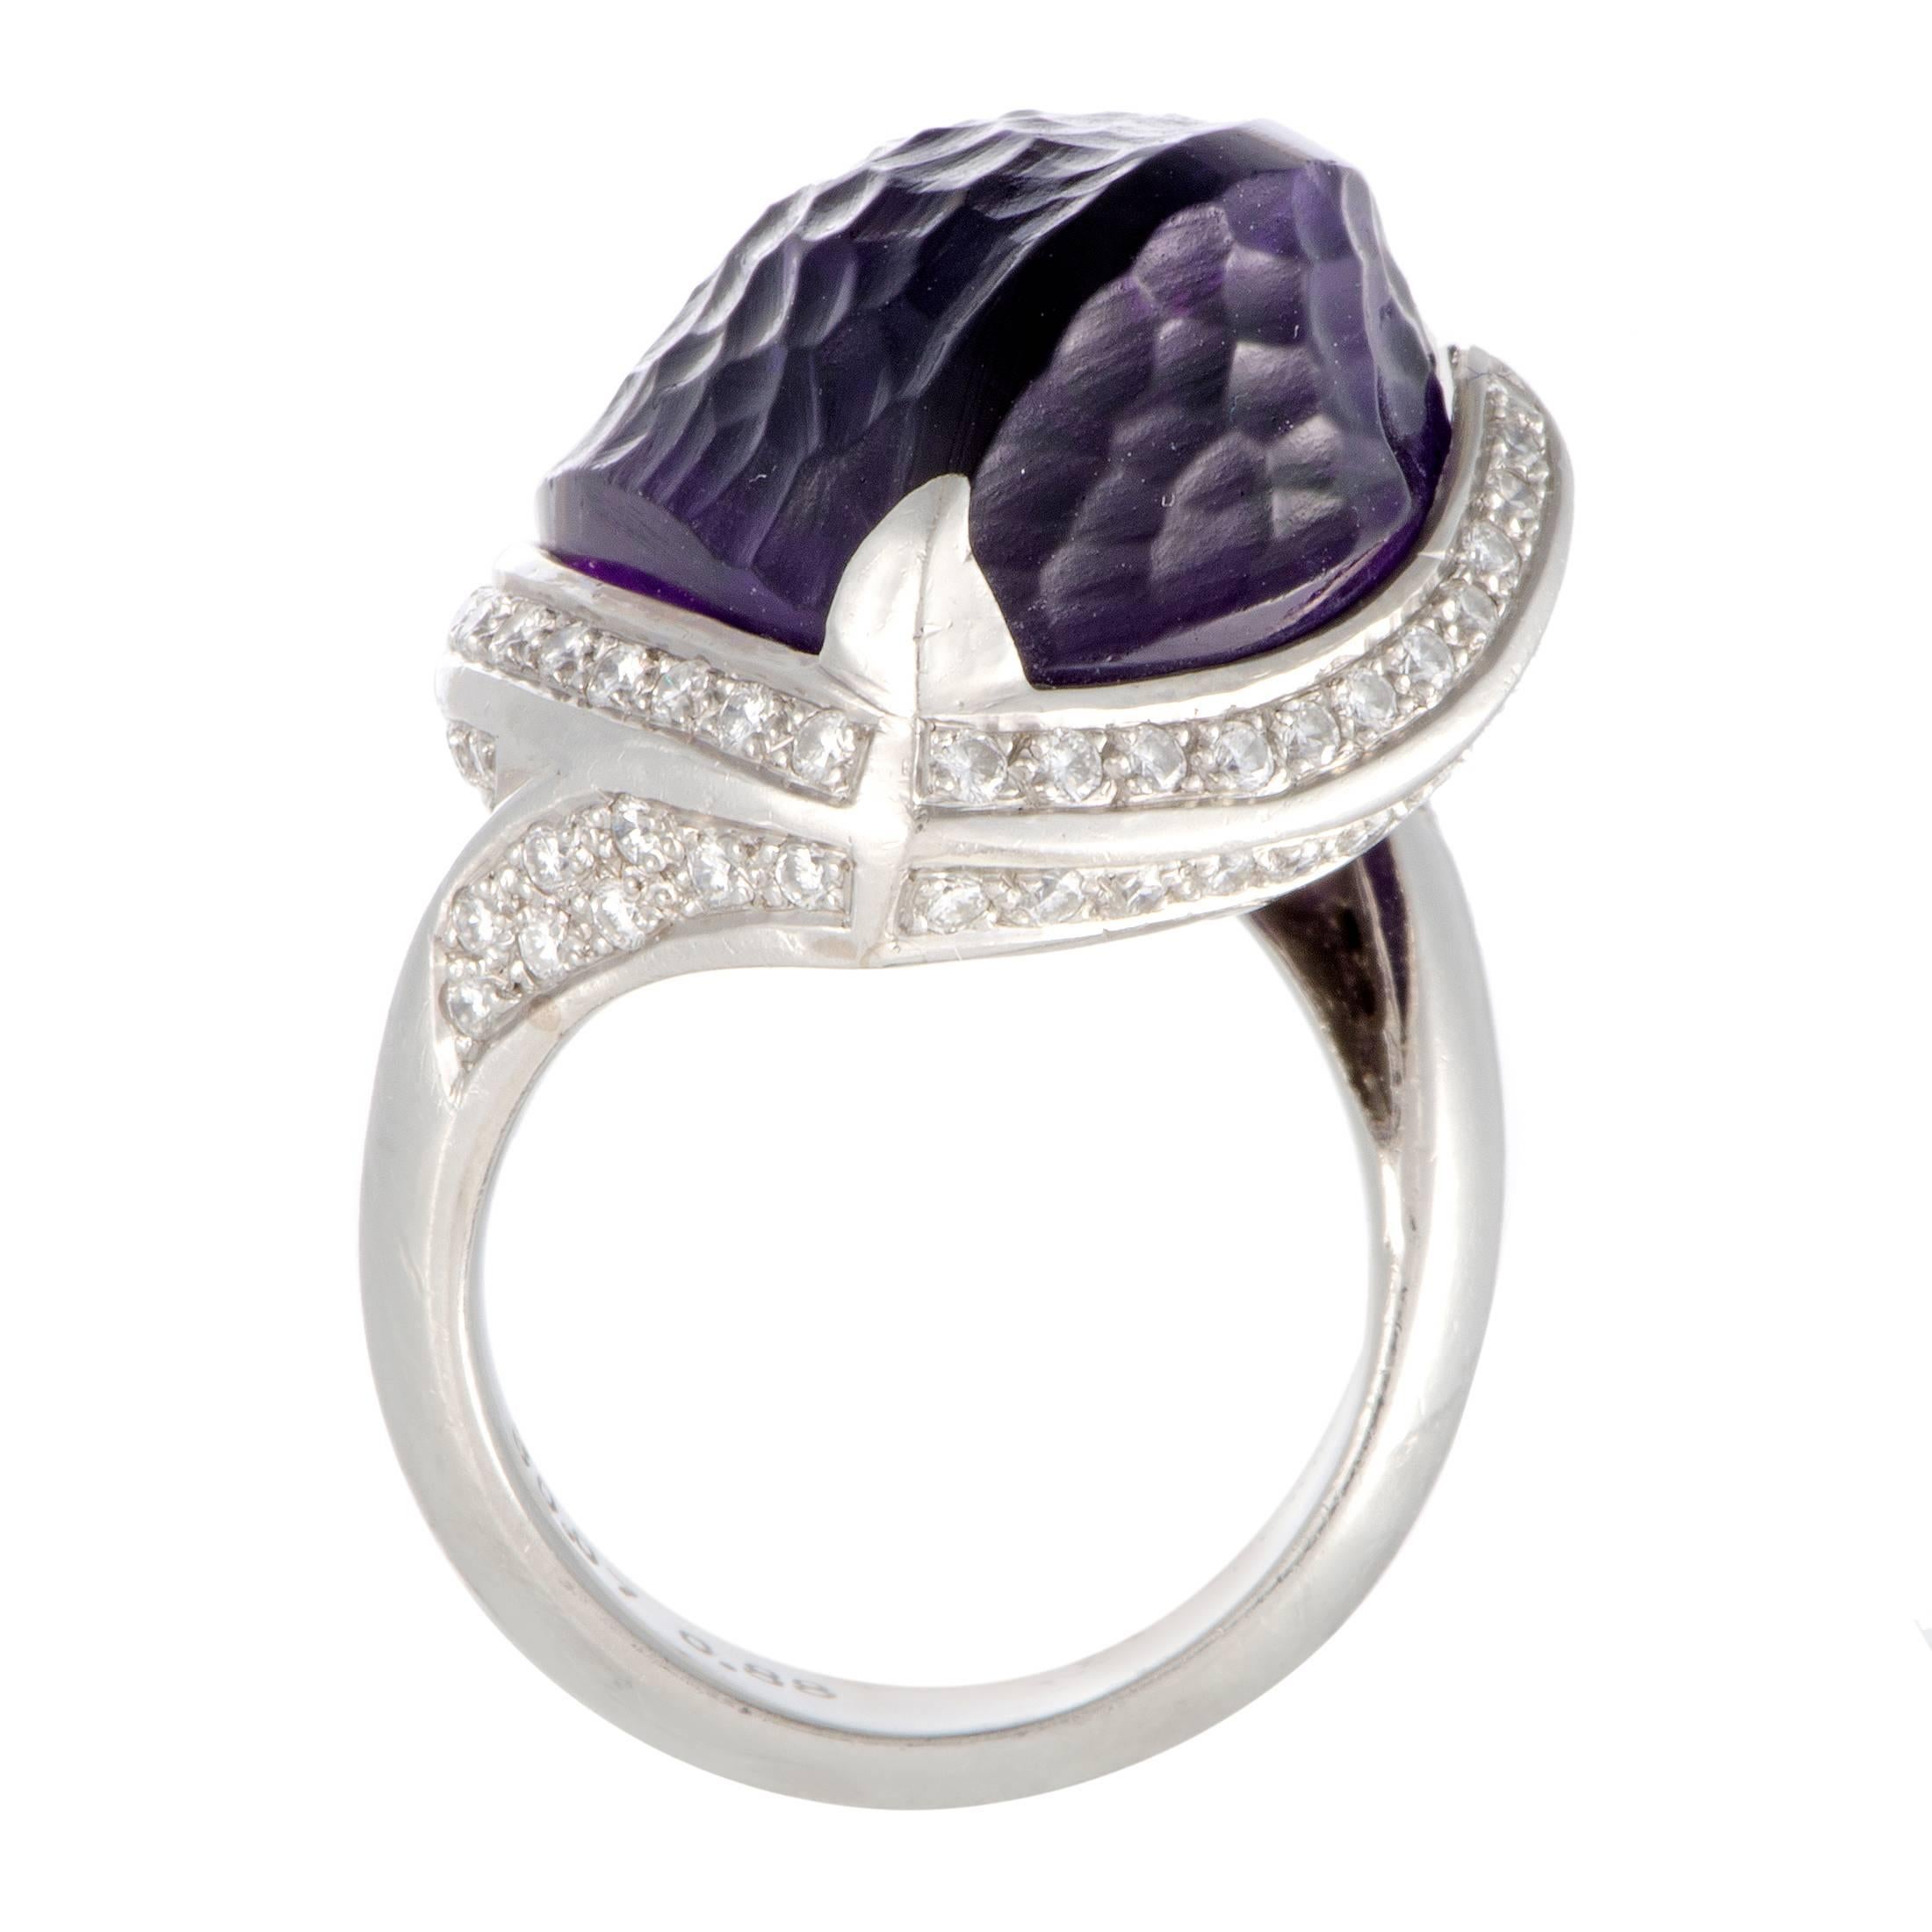 The intriguing cut of the spectacular amethyst adds to the compelling beauty of this superb jewelry piece that offers an exceptionally extravagant appearance. The ring is made of prestigious platinum and set with diamonds that total 0.88 carats,